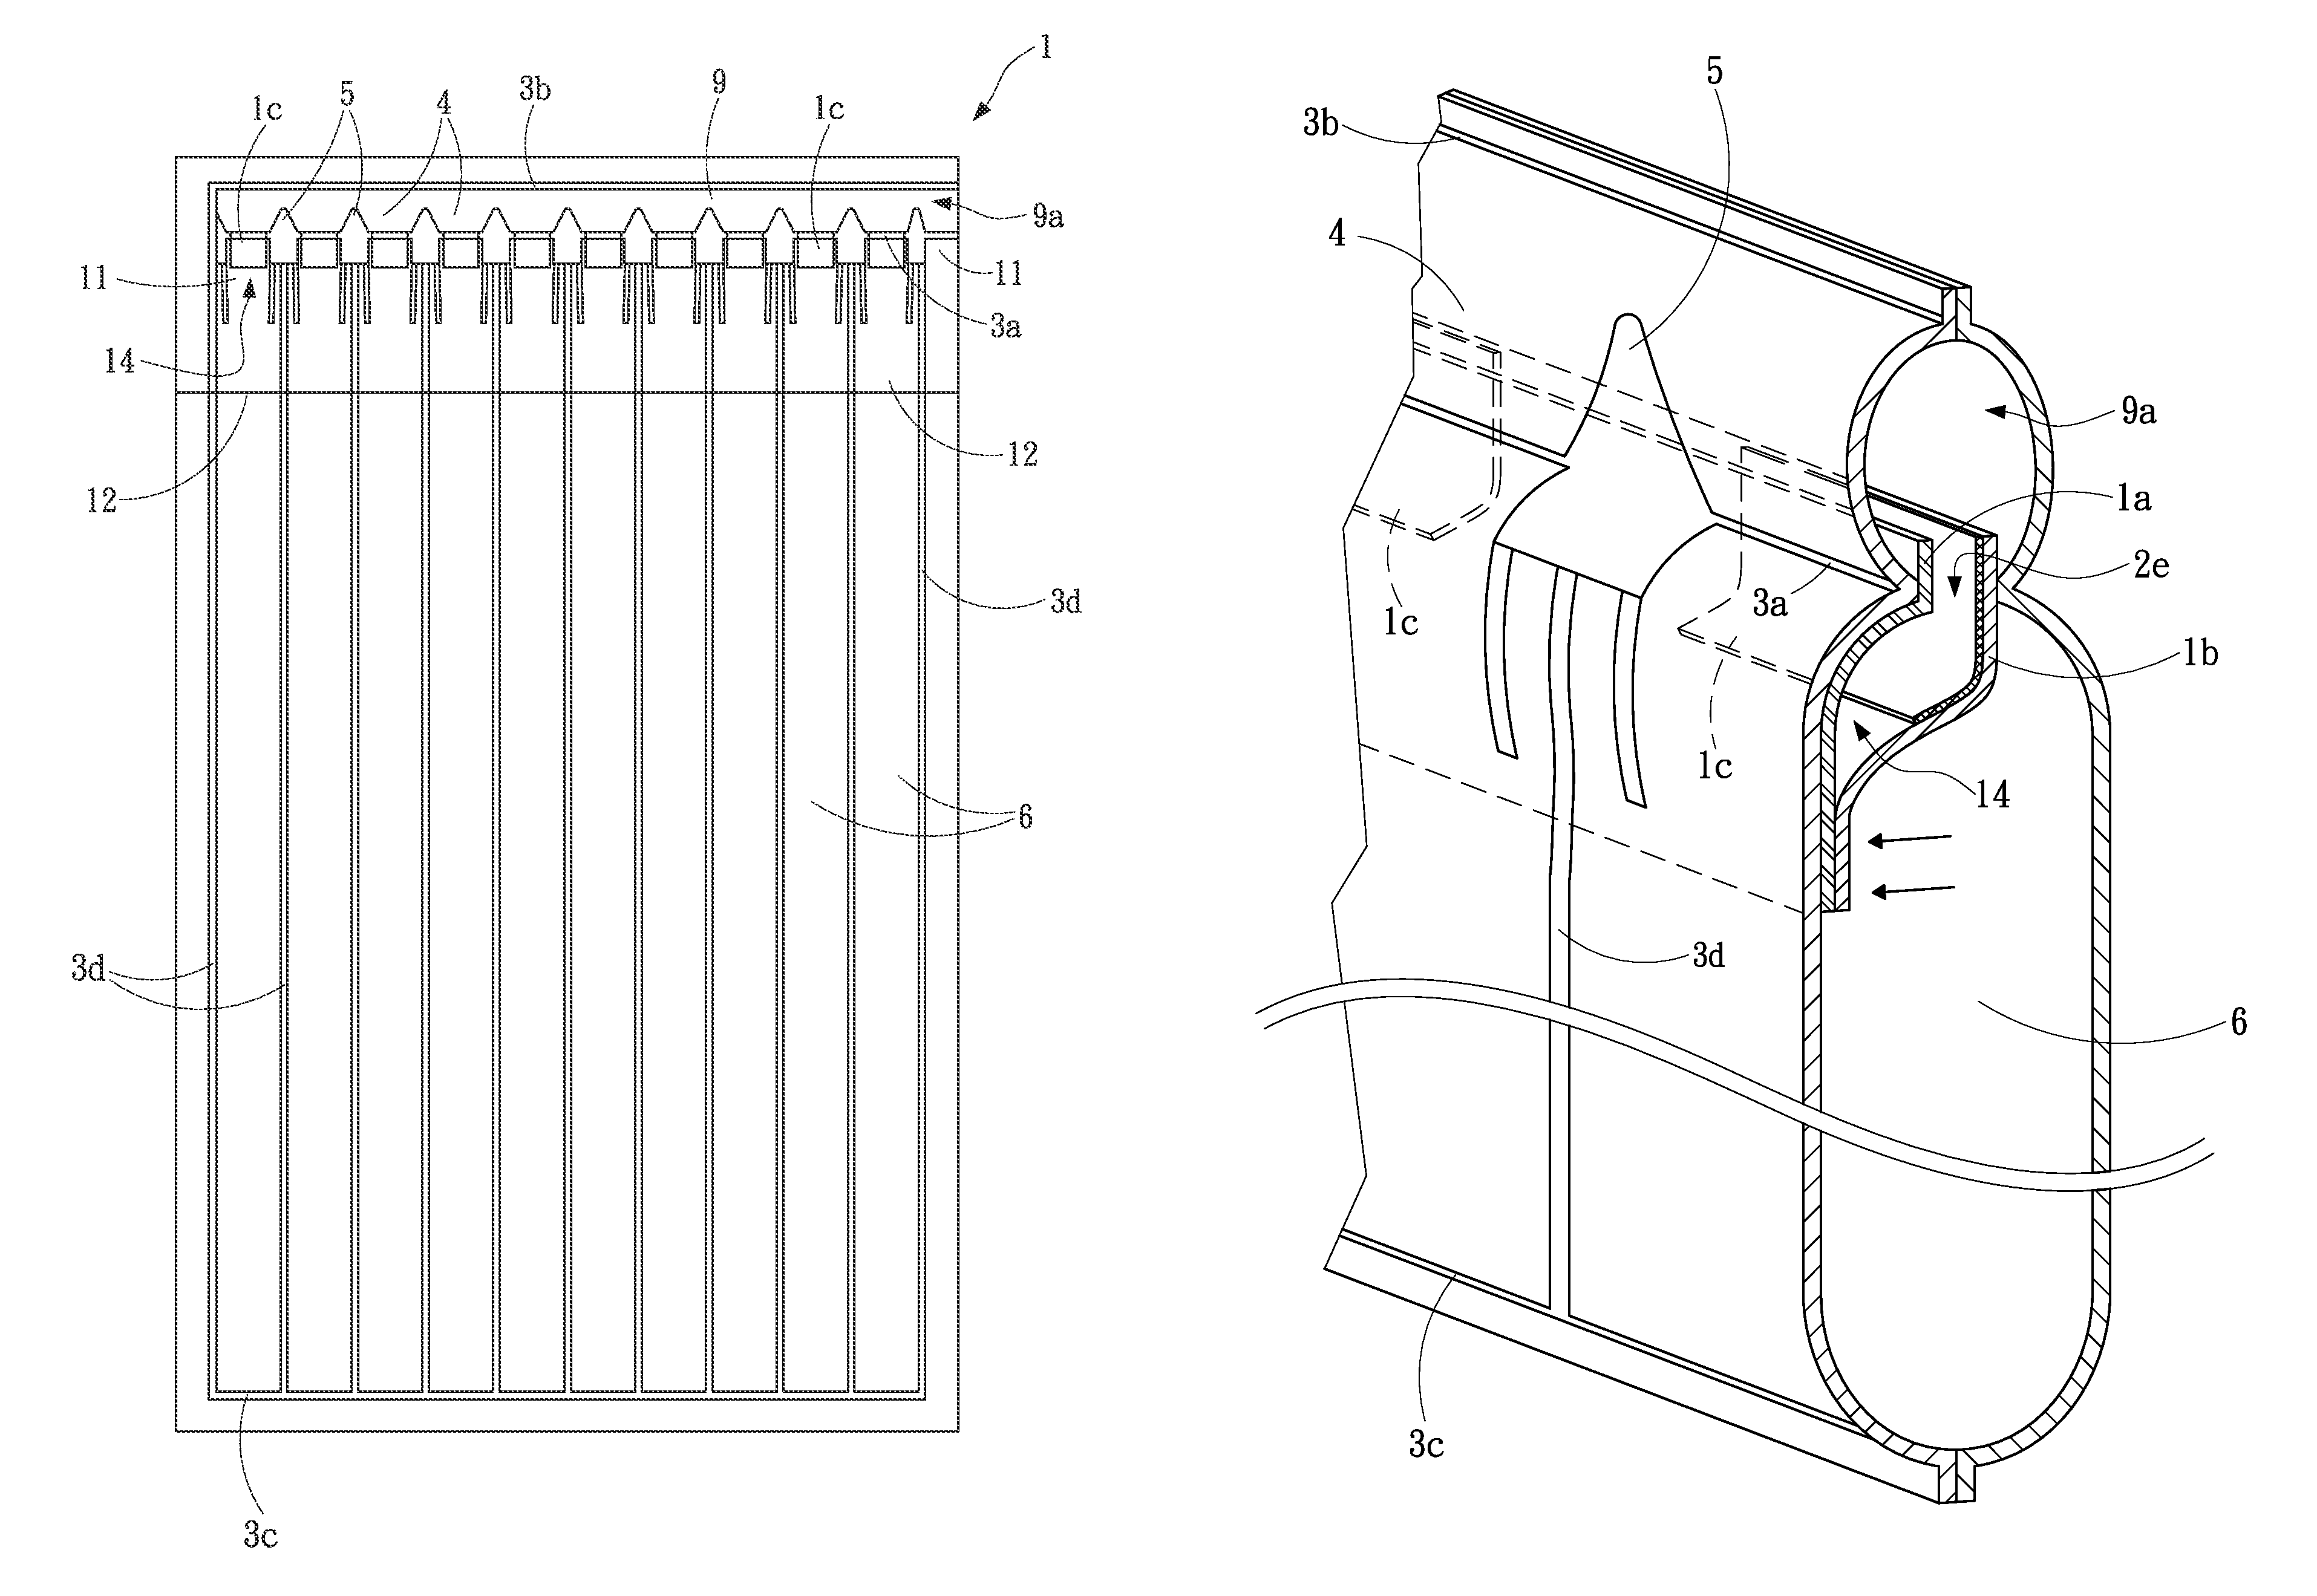 Air-sealed body with automatically opened air value